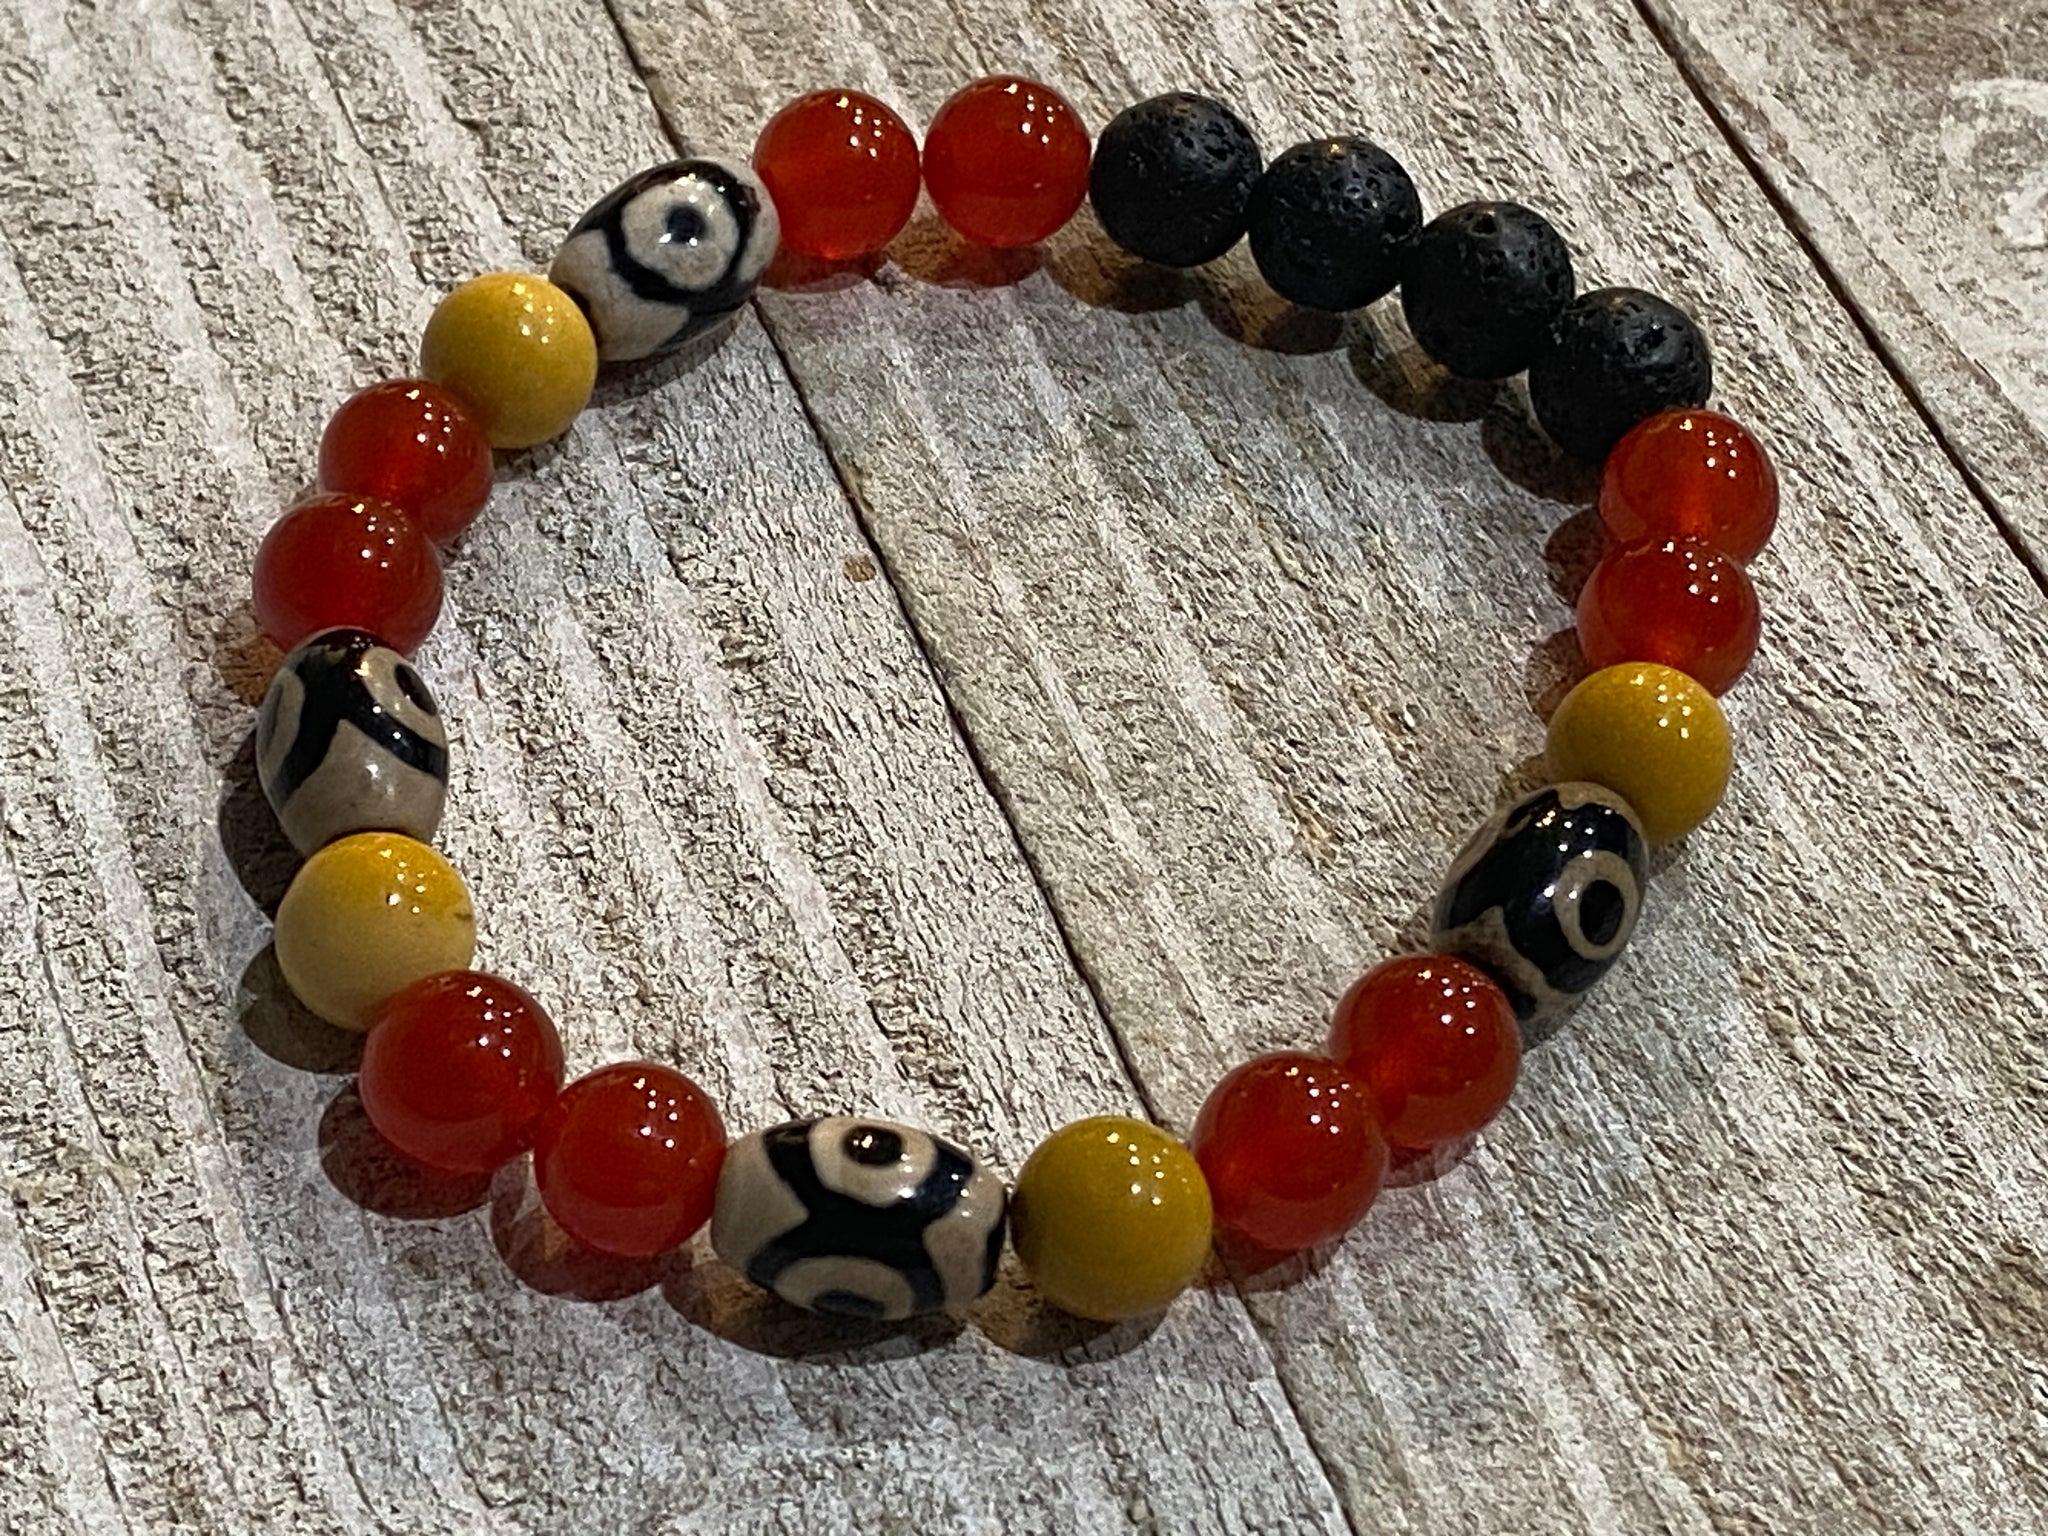 WHAT STONES ARE IN A CHAKRA BRACELET? – Moon Dance Charms